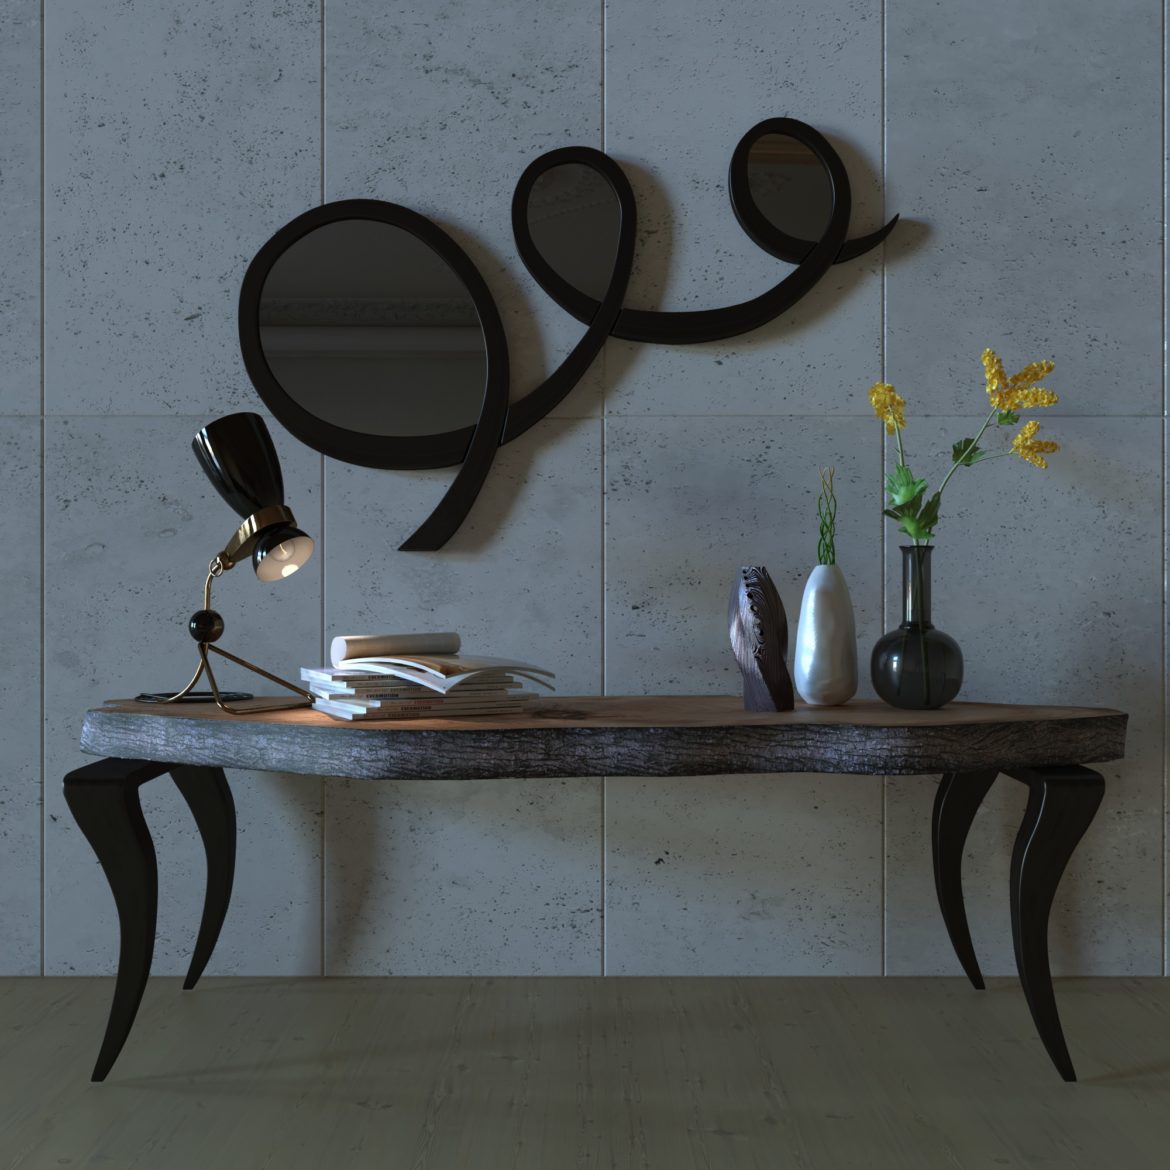 table and mirror-16 3d model max obj 295985